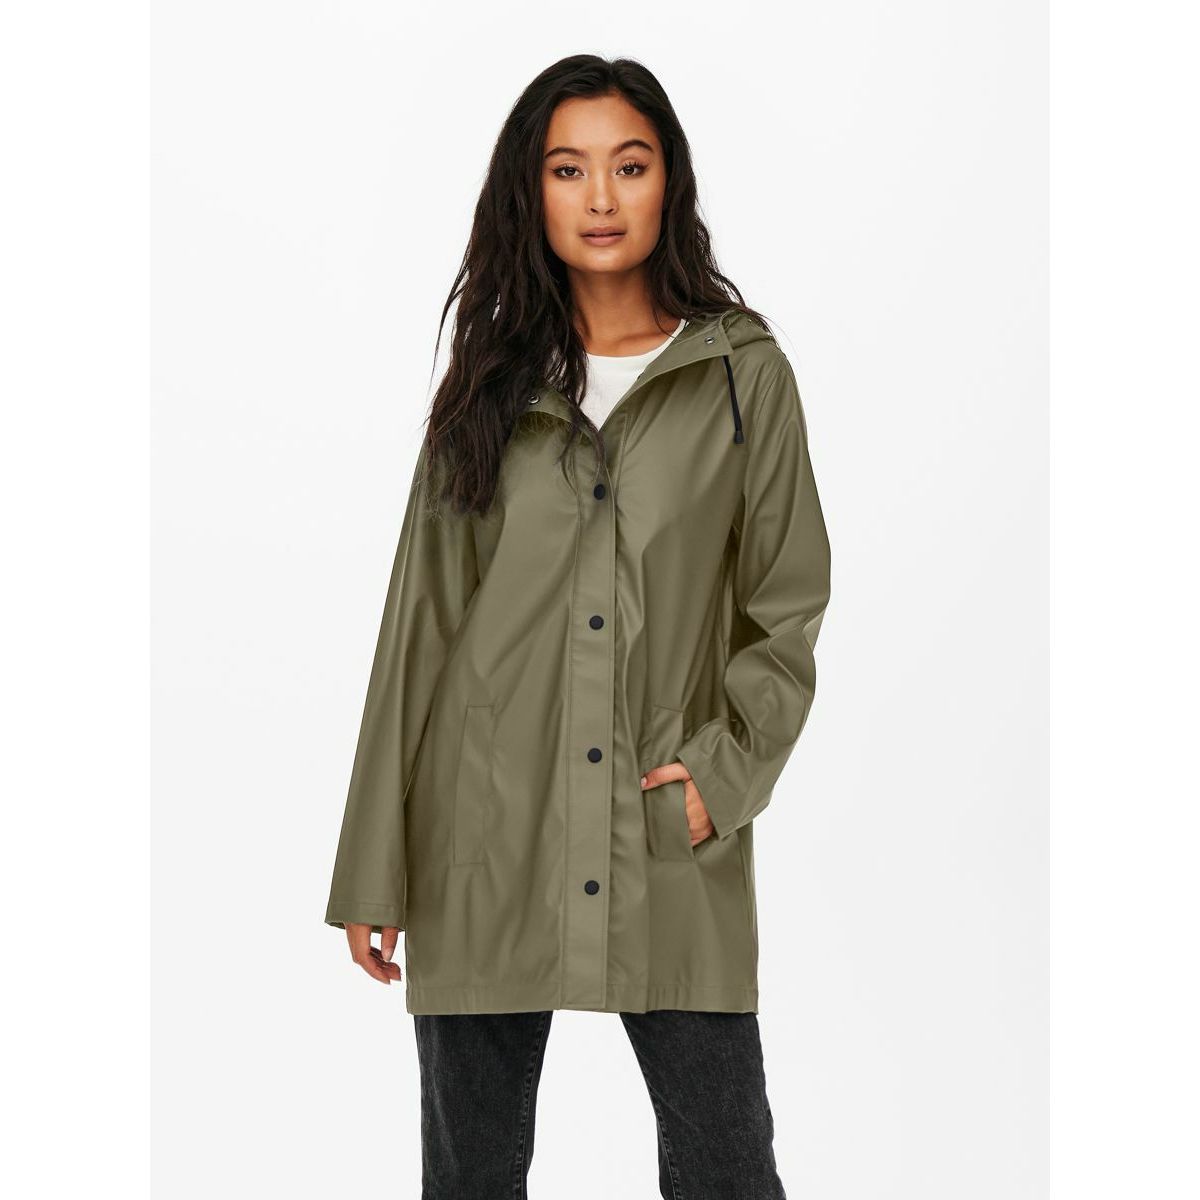 M, T2 Imperméable trenchs Only Femme trench ONLY 38 gris trenchs Only Femme Femme Vêtements Only Femme Manteaux & Vestes Only Femme Imperméables Imperméables 